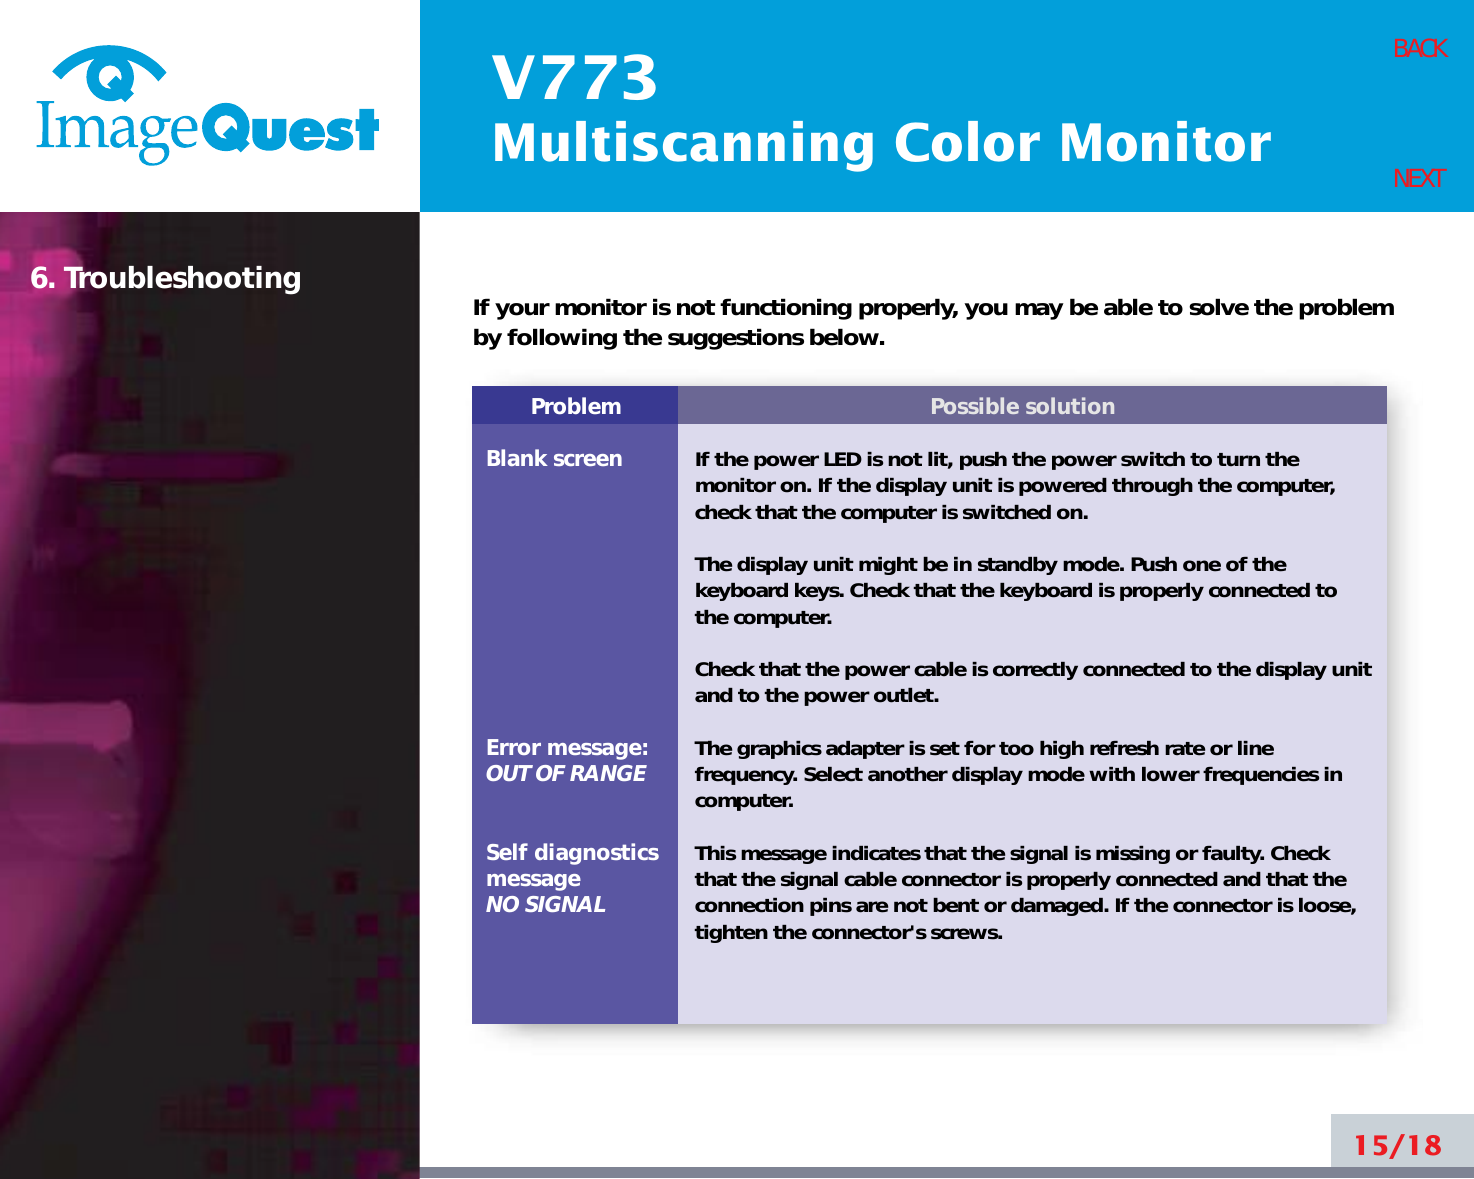 V773Multiscanning Color Monitor15/18BACKNEXT6. TroubleshootingProblemBlank screenError message:OUT OF RANGESelf diagnosticsmessageNO SIGNALPossible solutionIf the power LED is not lit, push the power switch to turn themonitor on. If the display unit is powered through the computer,check that the computer is switched on.The display unit might be in standby mode. Push one of thekeyboard keys. Check that the keyboard is properly connected tothe computer.Check that the power cable is correctly connected to the display unitand to the power outlet. The graphics adapter is set for too high refresh rate or linefrequency. Select another display mode with lower frequencies incomputer.This message indicates that the signal is missing or faulty. Checkthat the signal cable connector is properly connected and that theconnection pins are not bent or damaged. If the connector is loose,tighten the connector&apos;s screws.If your monitor is not functioning properly, you may be able to solve the problemby following the suggestions below.